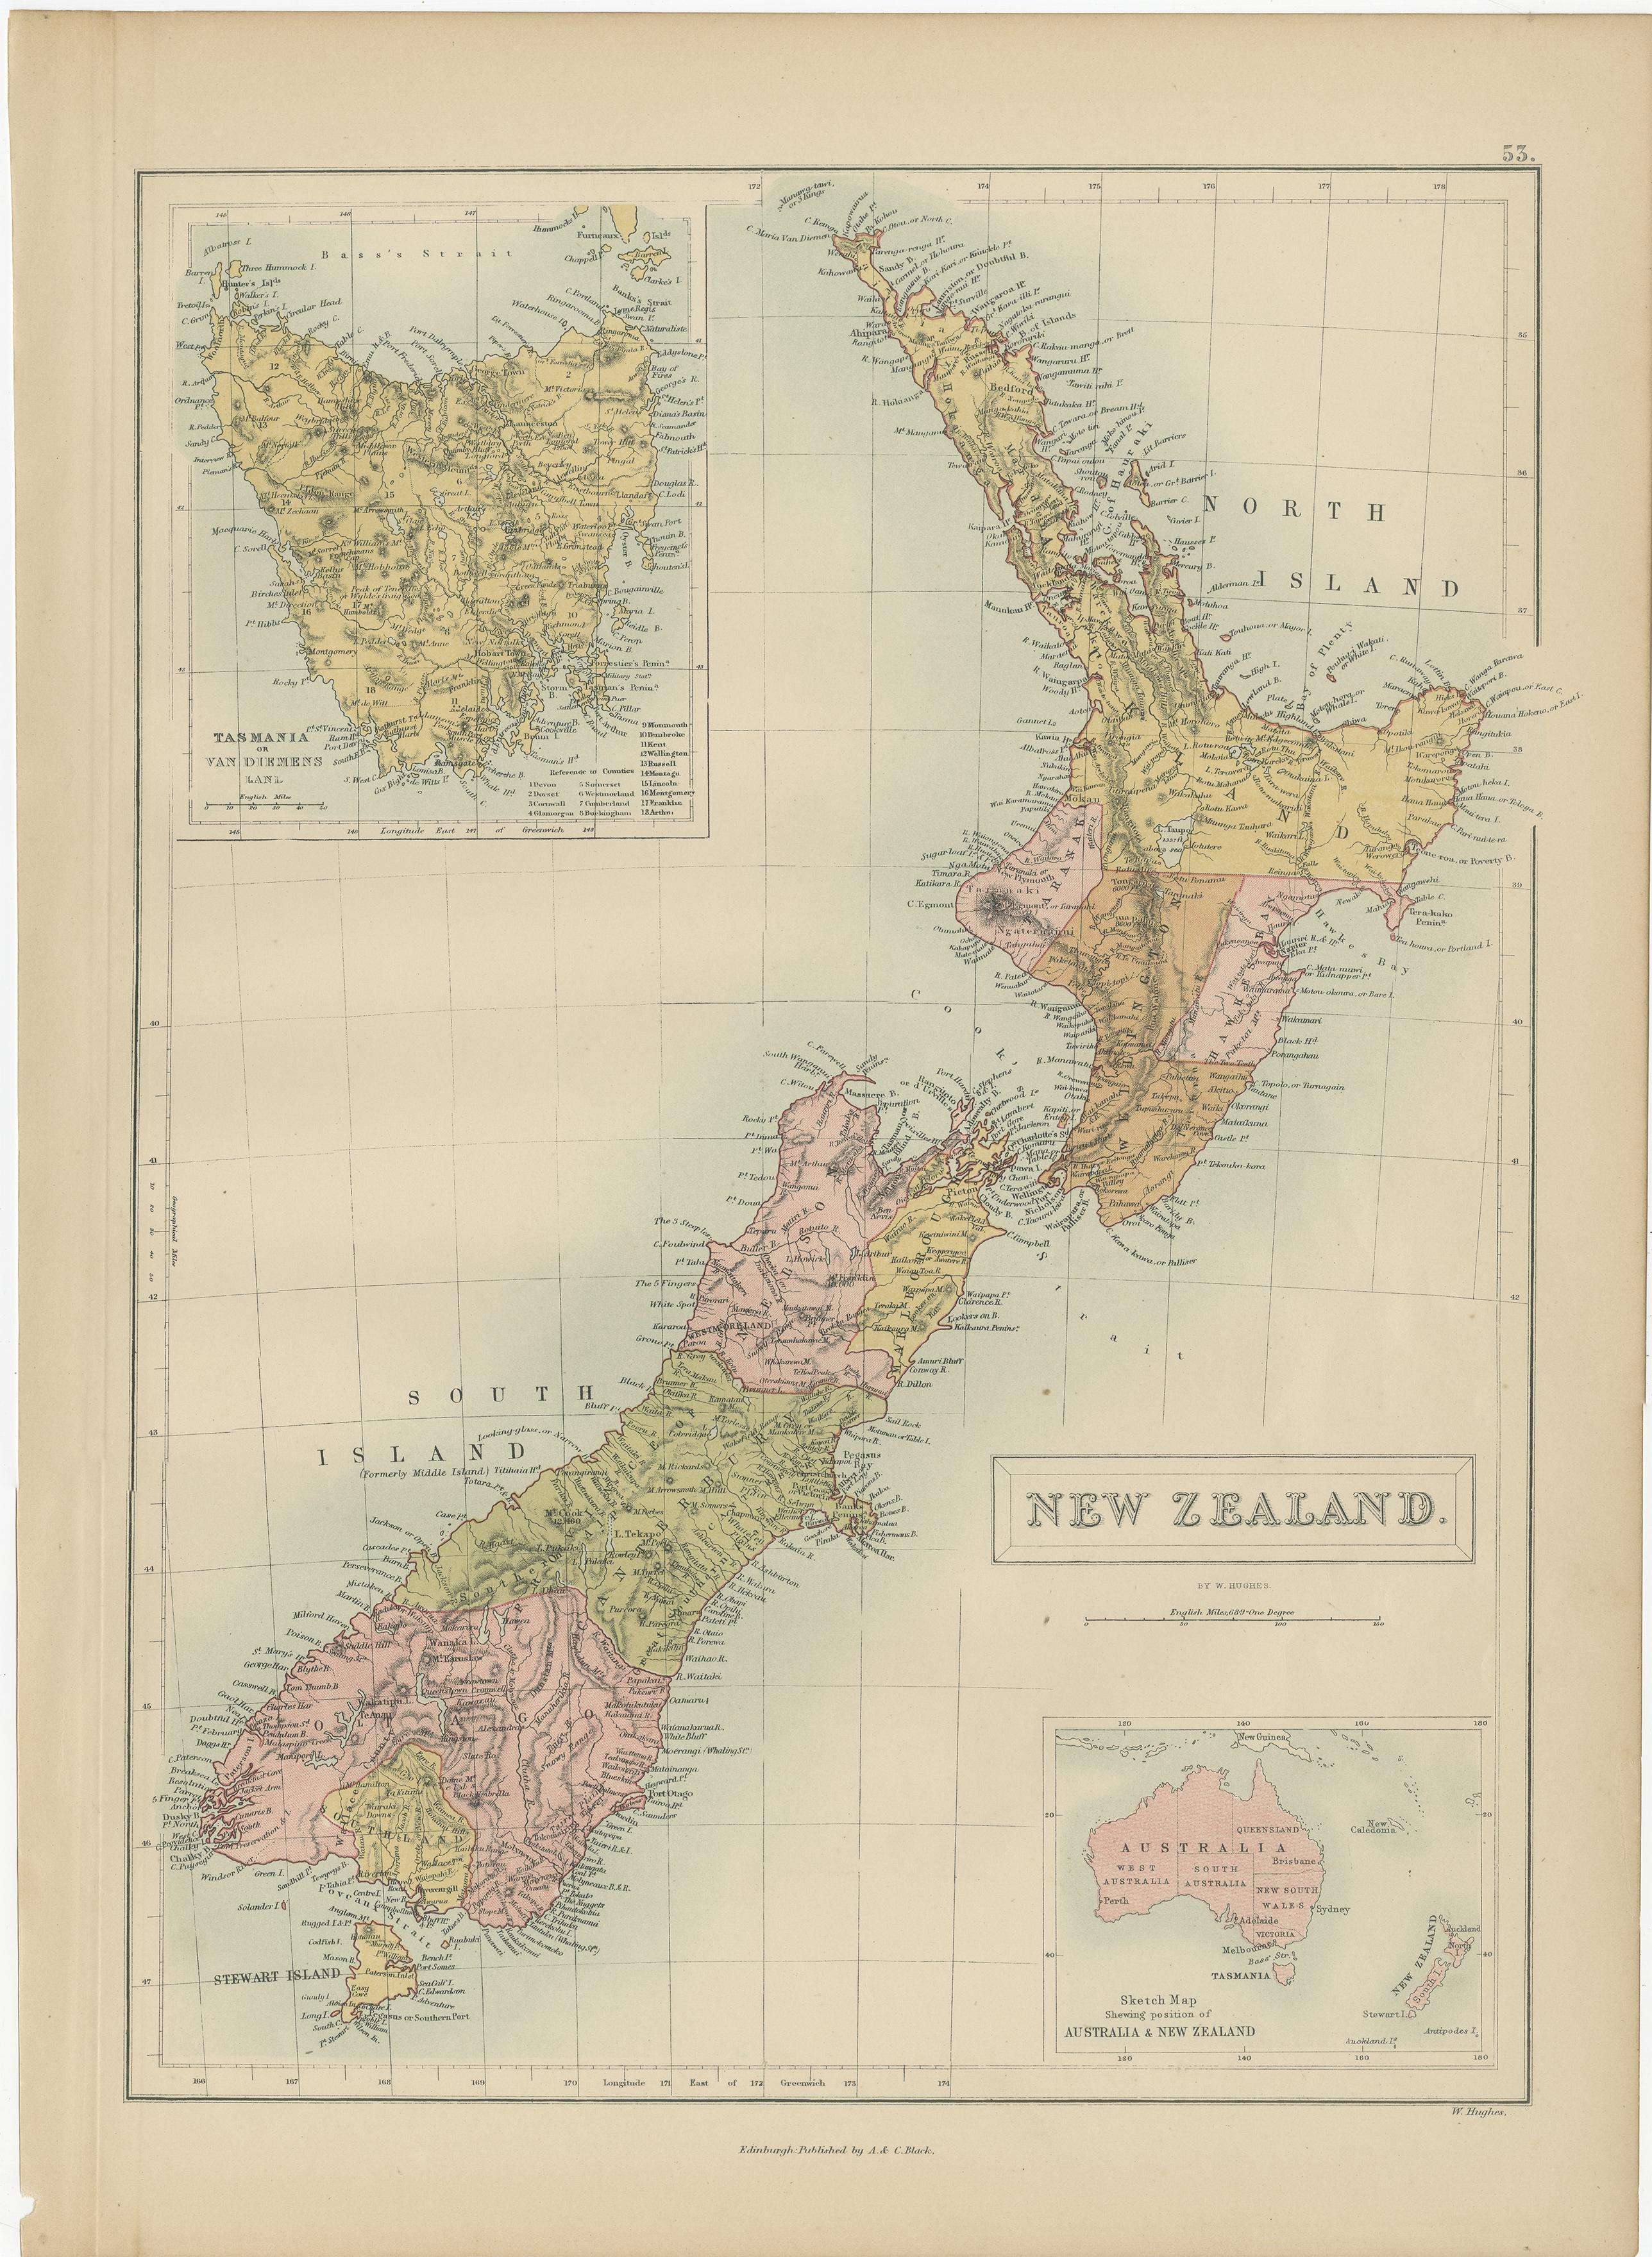 Antique map titled 'New Zealand'. Original antique map of New Zealand with inset Maps of Australia, New Zealand and Tasmania. This map originates from ‘Black's General Atlas of The World’. Published by A & C. Black, 1870.